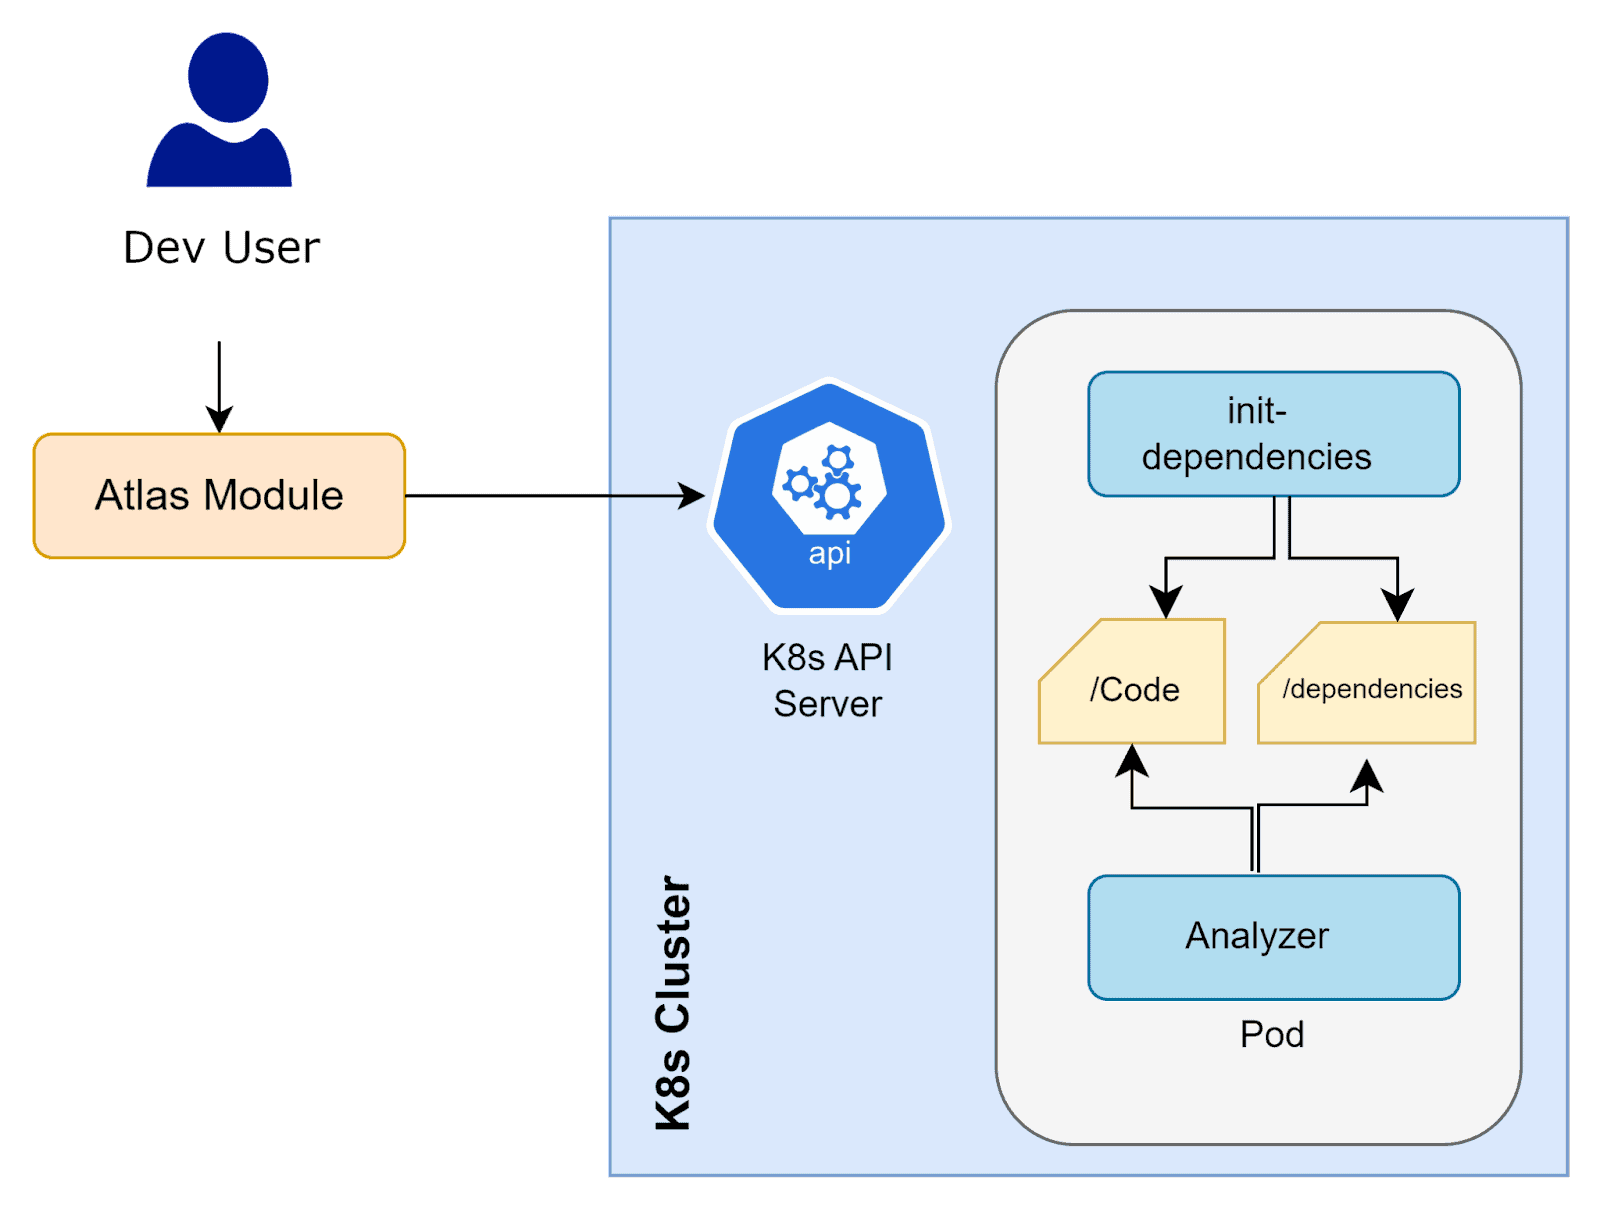 Diagram flow showing process from Dev User to K8s Cluster by Atlas Module